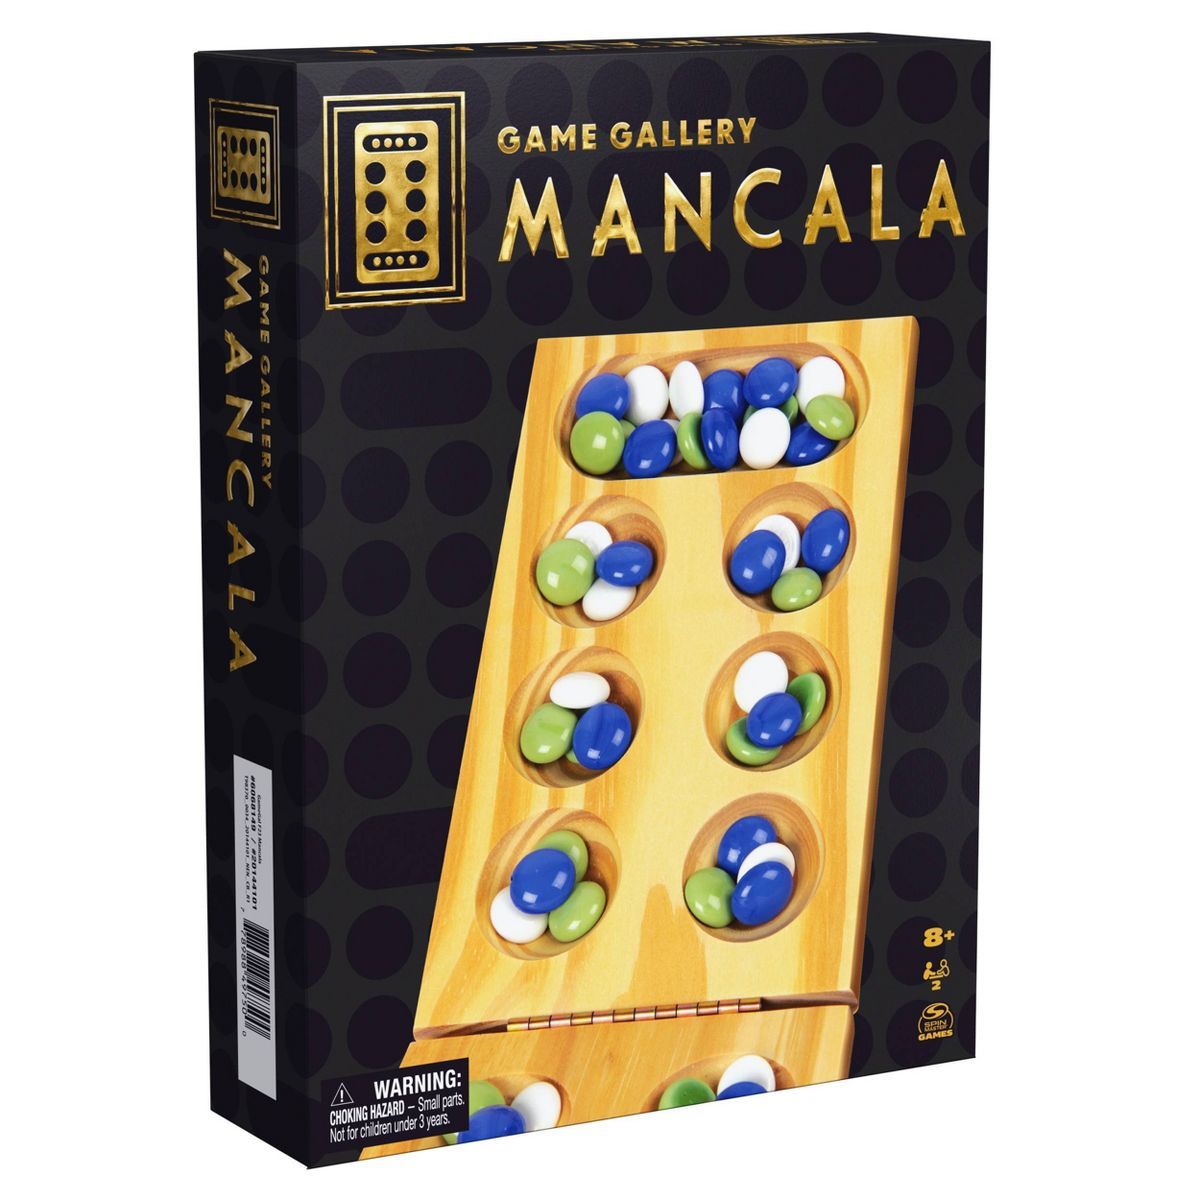 Game Gallery Solid Wood Mancala | Target